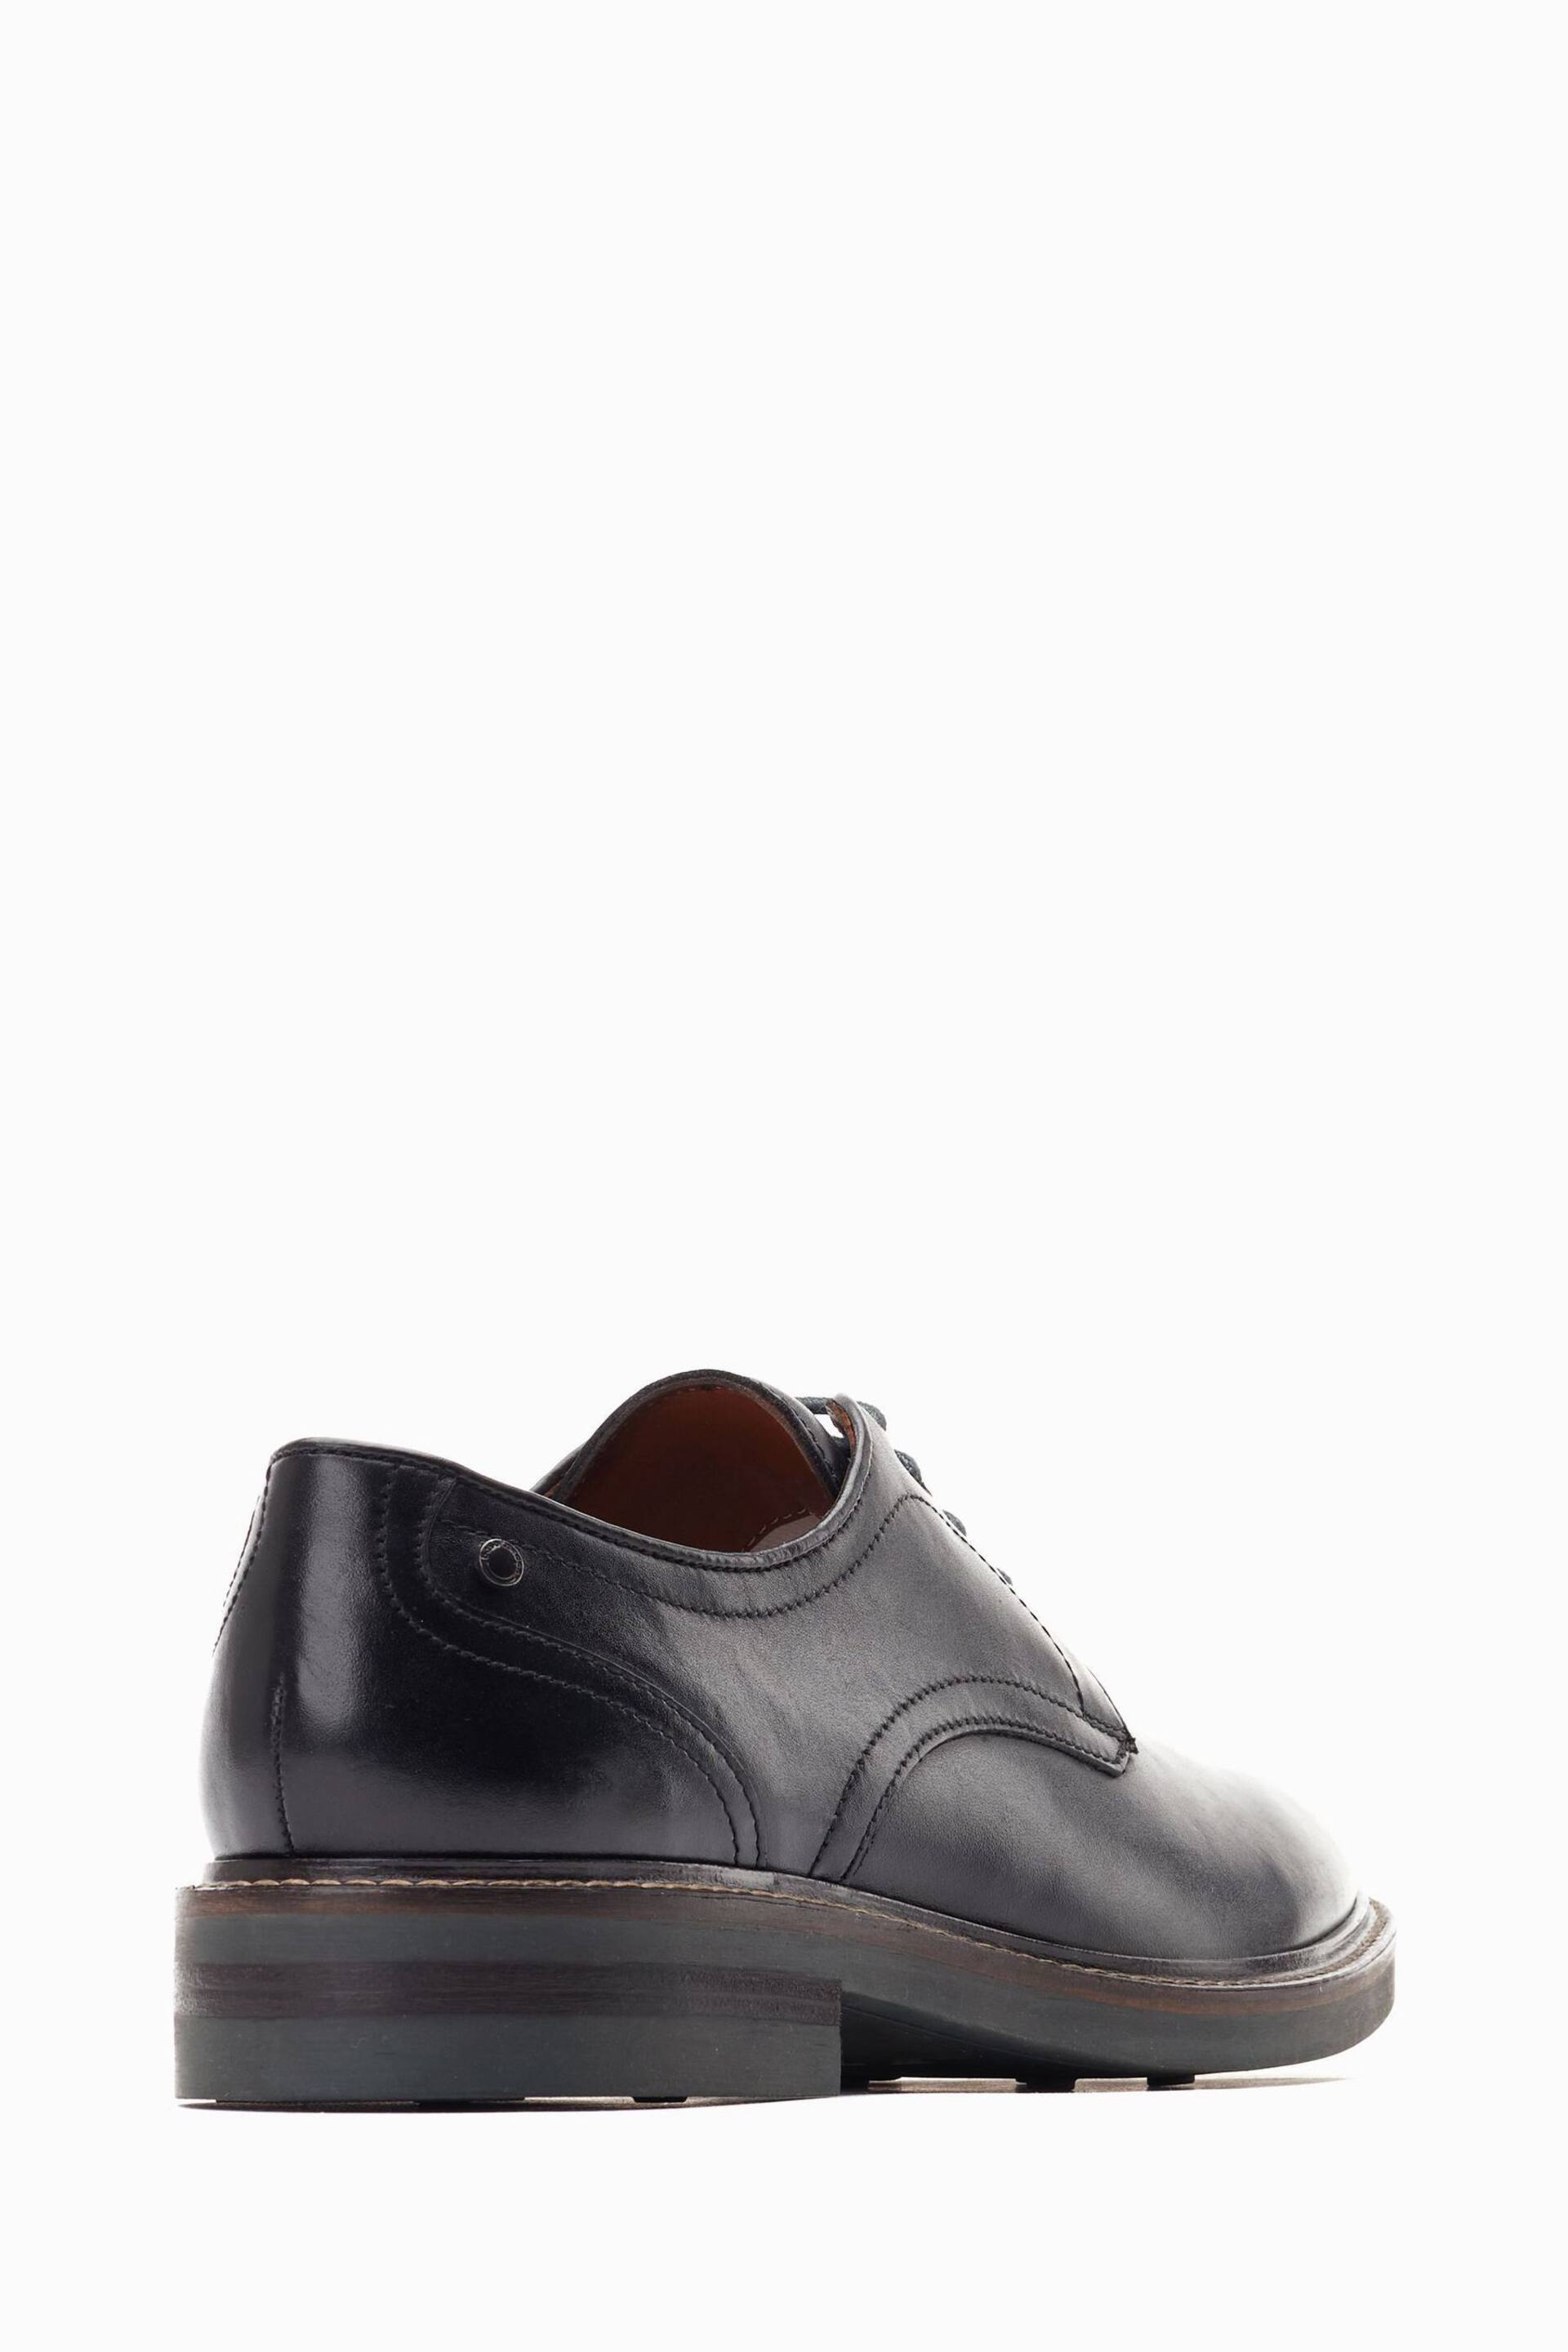 Base London Mawley Lace-Up Derby Shoes - Image 3 of 6